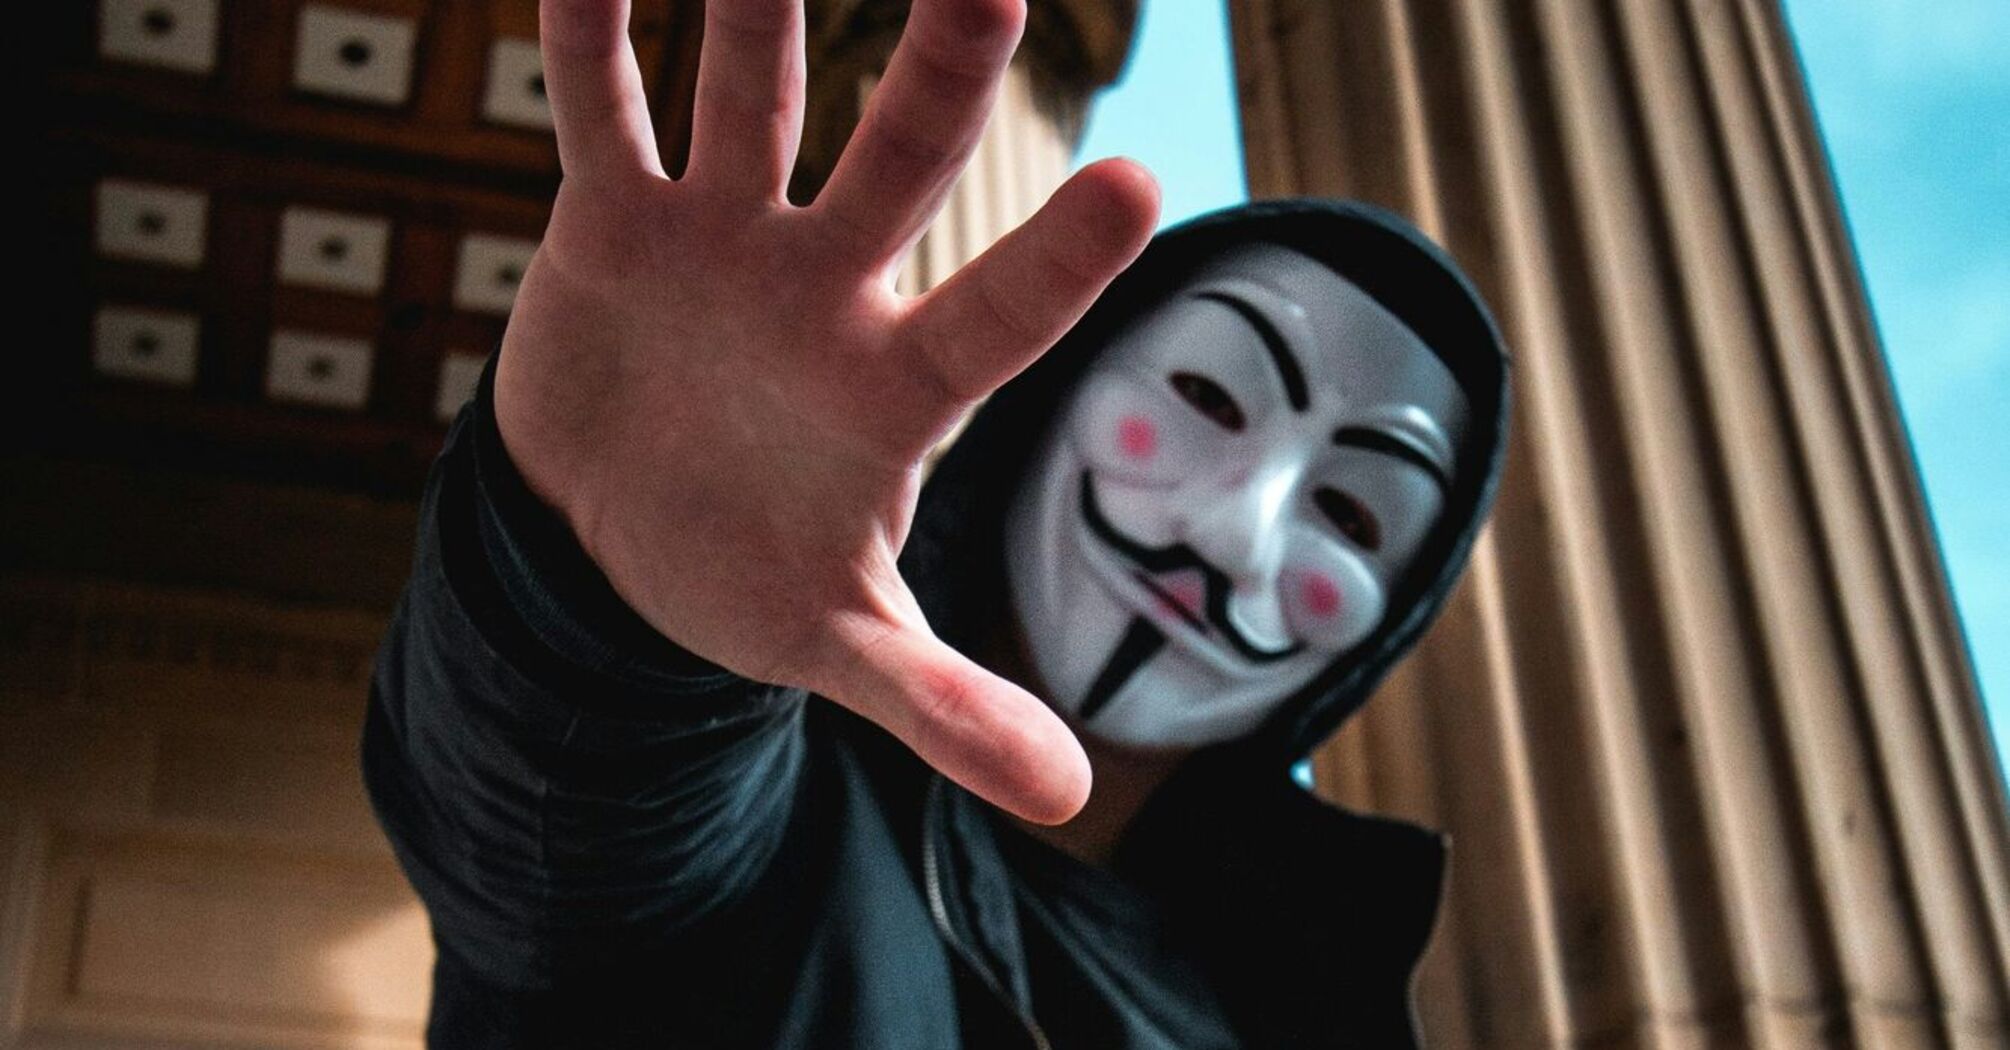 Person with a Guy Fawkes mask extending hand towards the camera